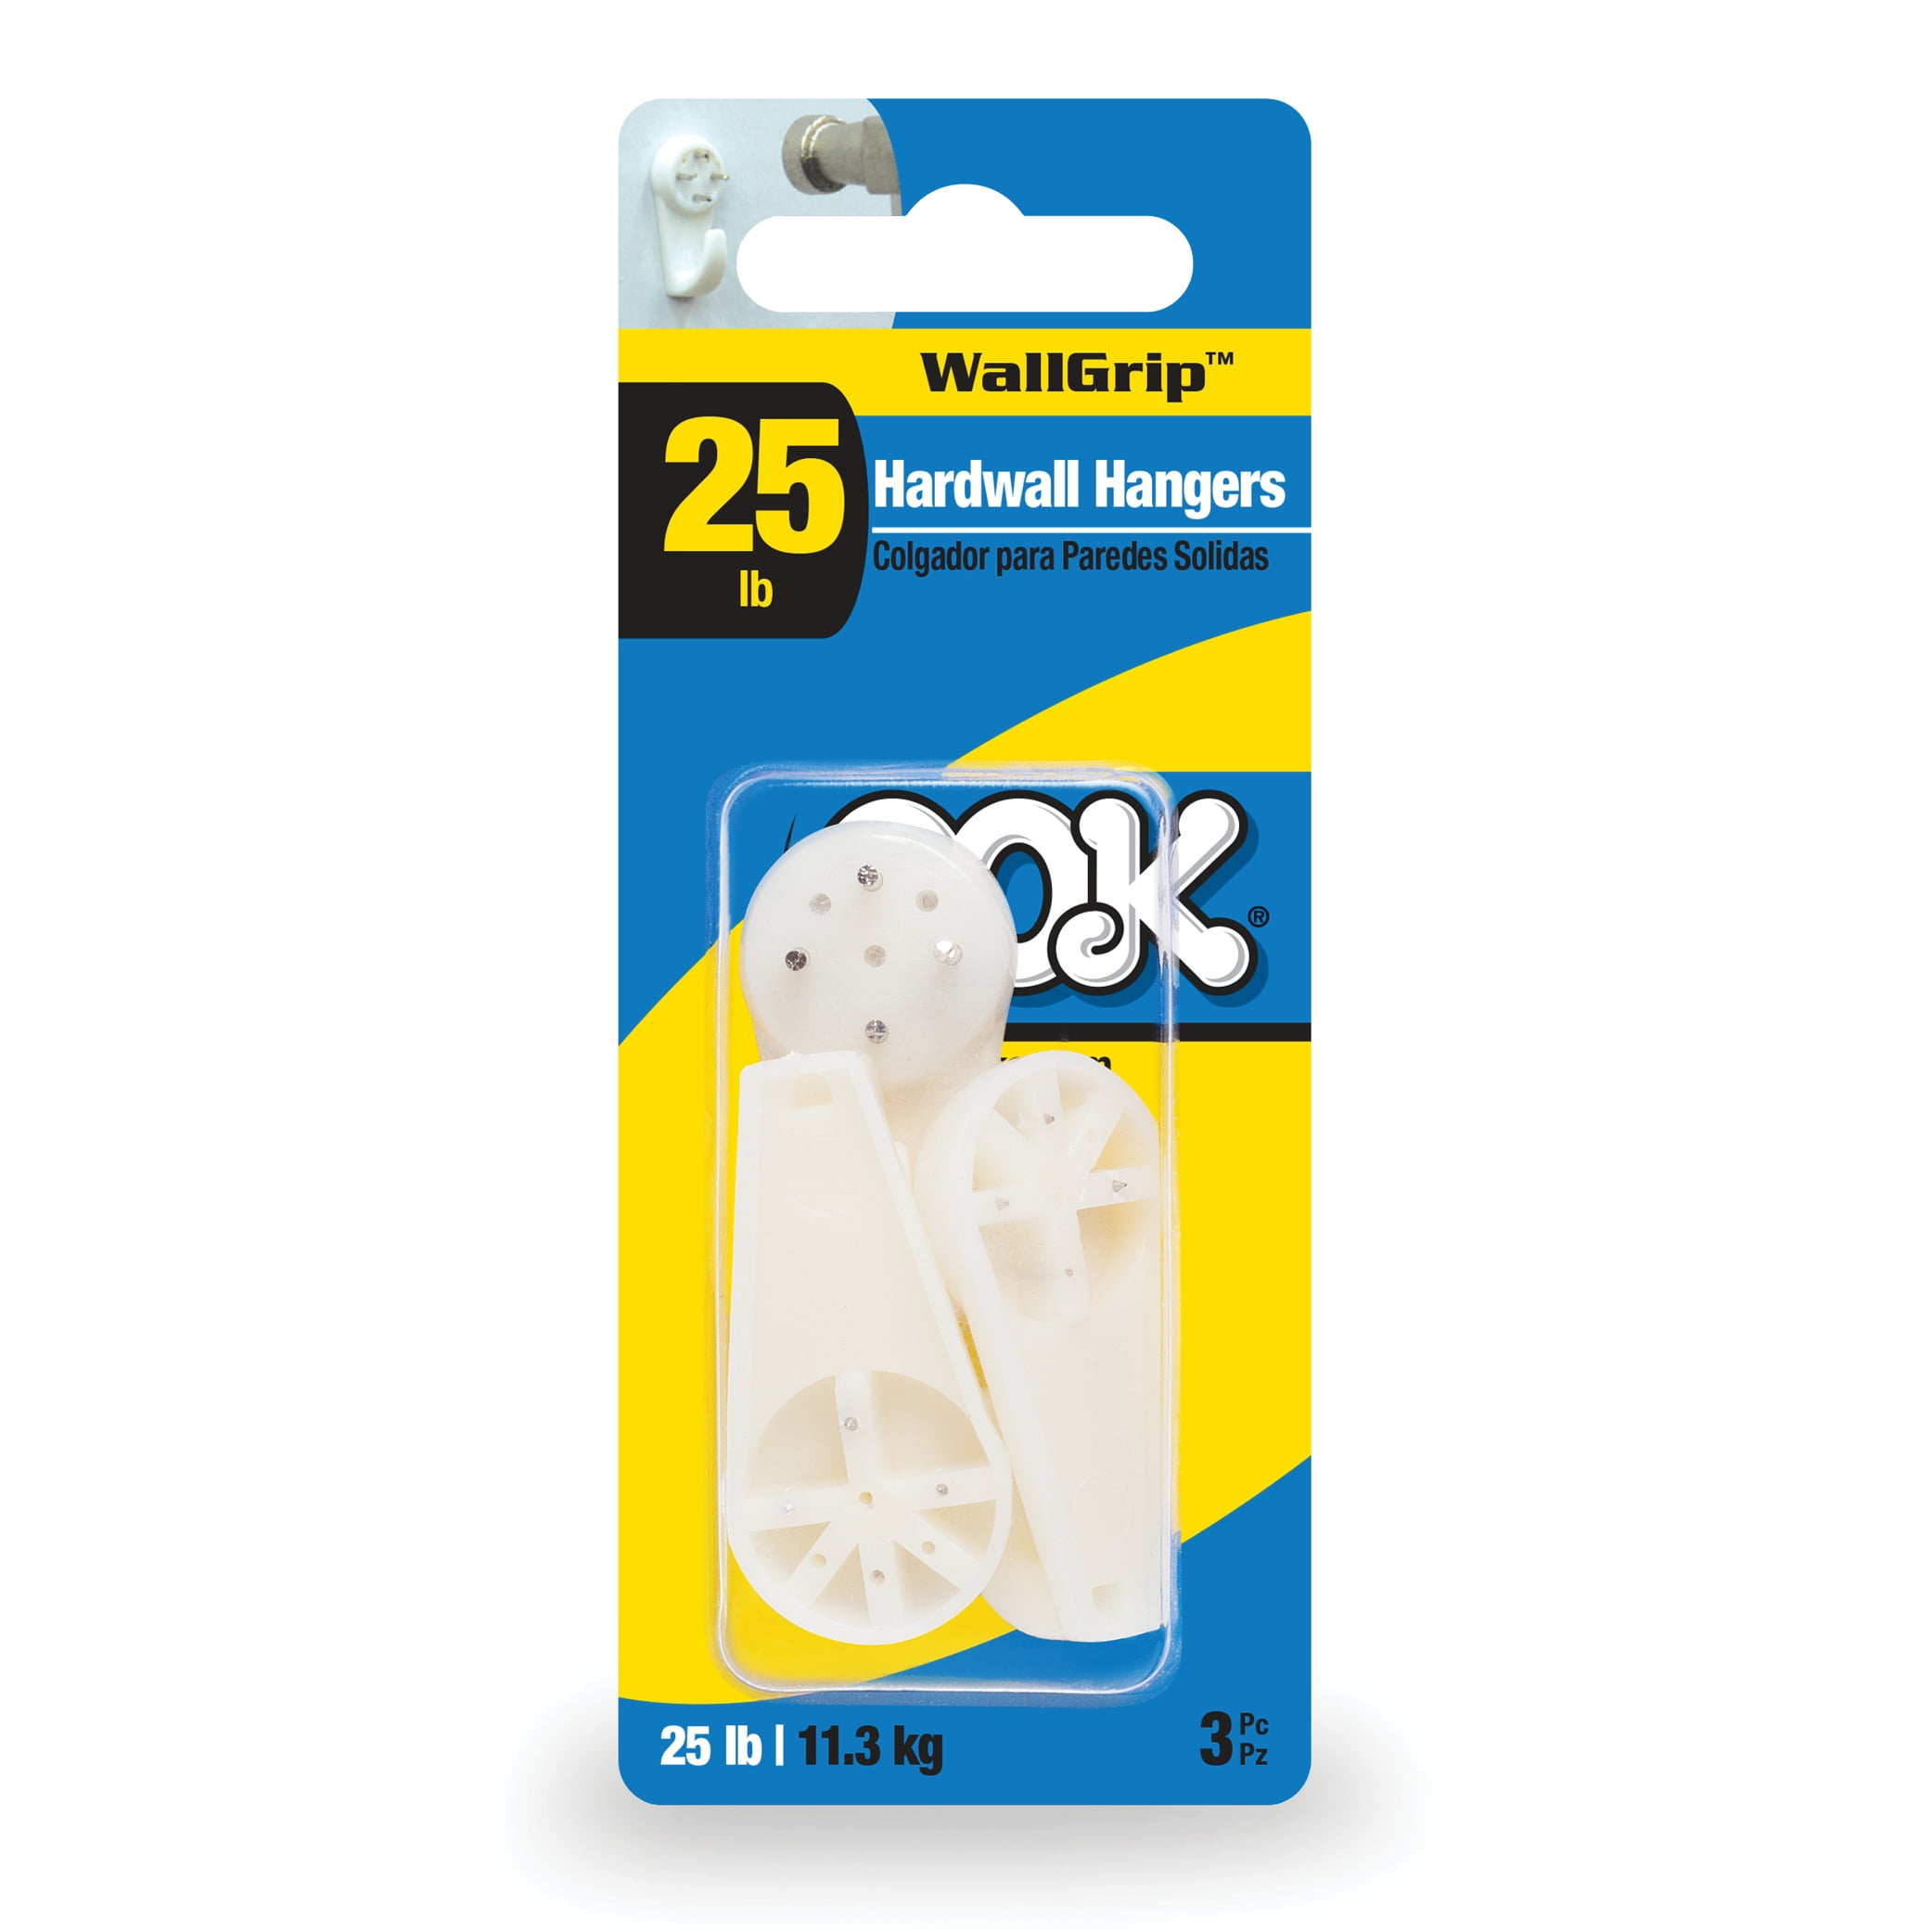 OOK Wall Grip, Hard Wall Hangers, White, 25LB, 3 Pieces